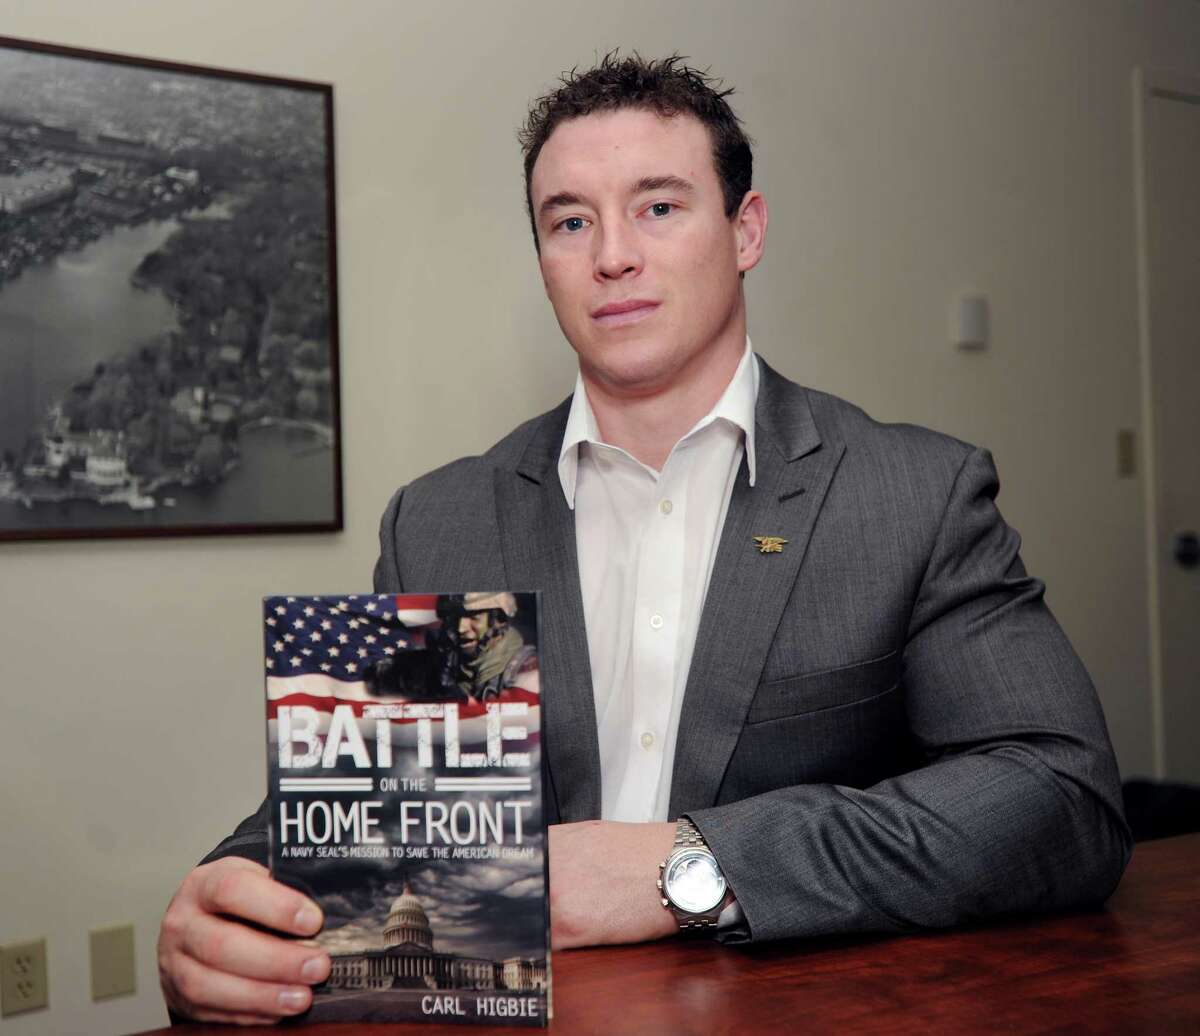 Holding his book "Battle on the Home Front," Carl Higbie, a former Navy SEAL who did two tours of duty in Iraq, at the office of the Greenwich Time on Tuesday. Higbie, a Greenwich resident, is running for Congress in the 4th District as a Republican.